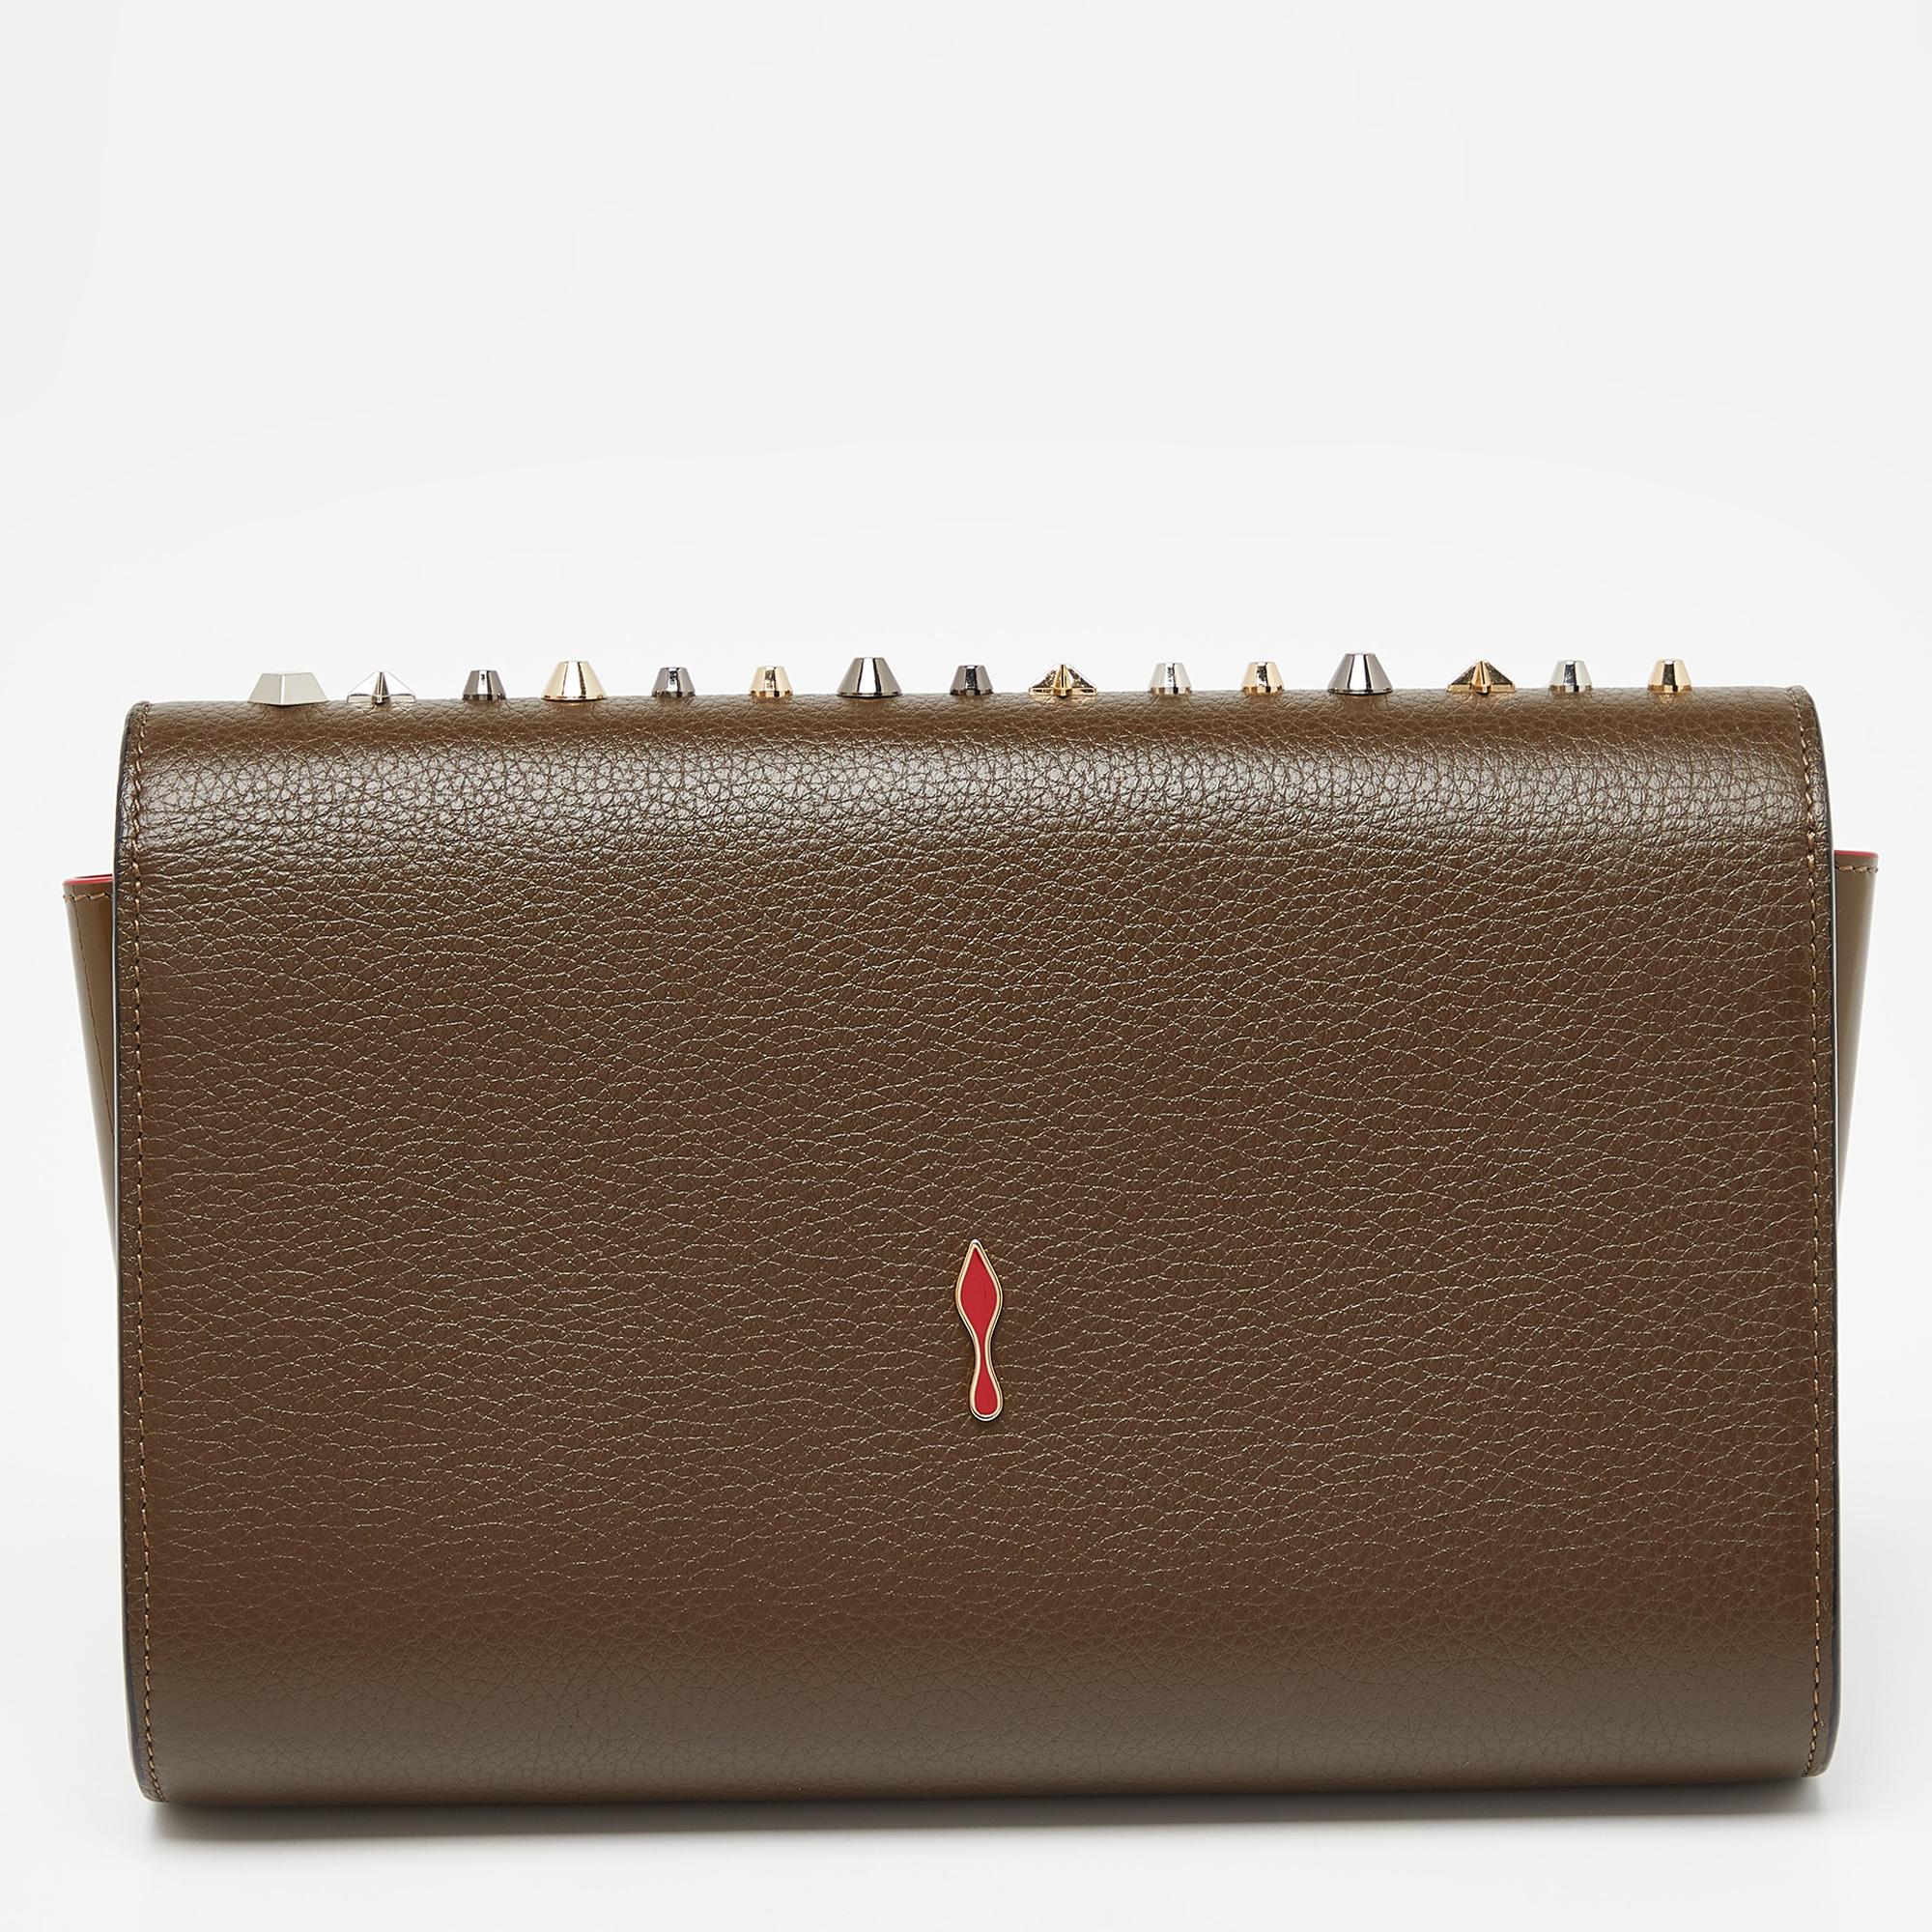 Whether going out for drinks or a casual outing, Christian Louboutin's Paloma clutch is the perfect way to add a little drama to your look. It comes crafted in patent leather with striking embellishments. The signature red interior is equipped with